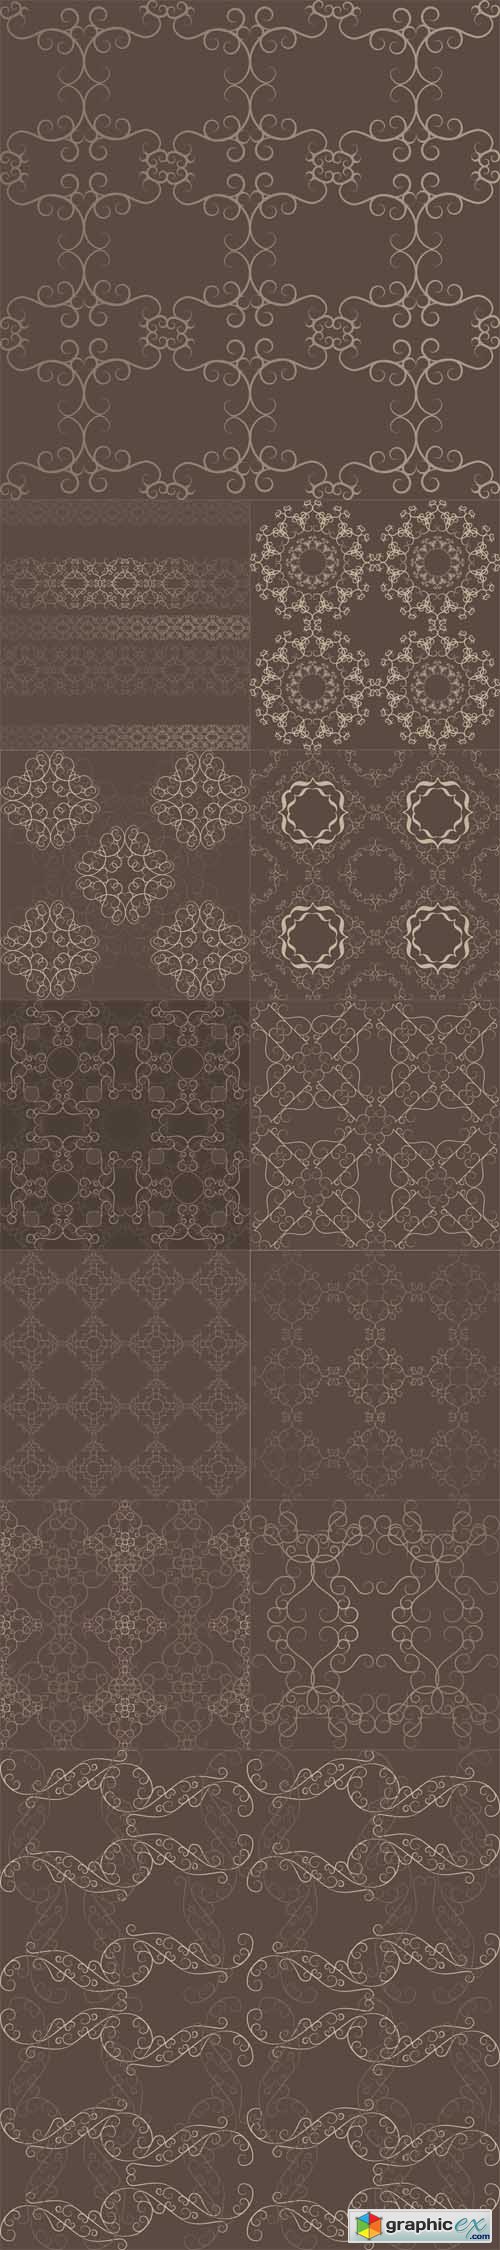 Abstract Victorian Orient Ethnic Patterns